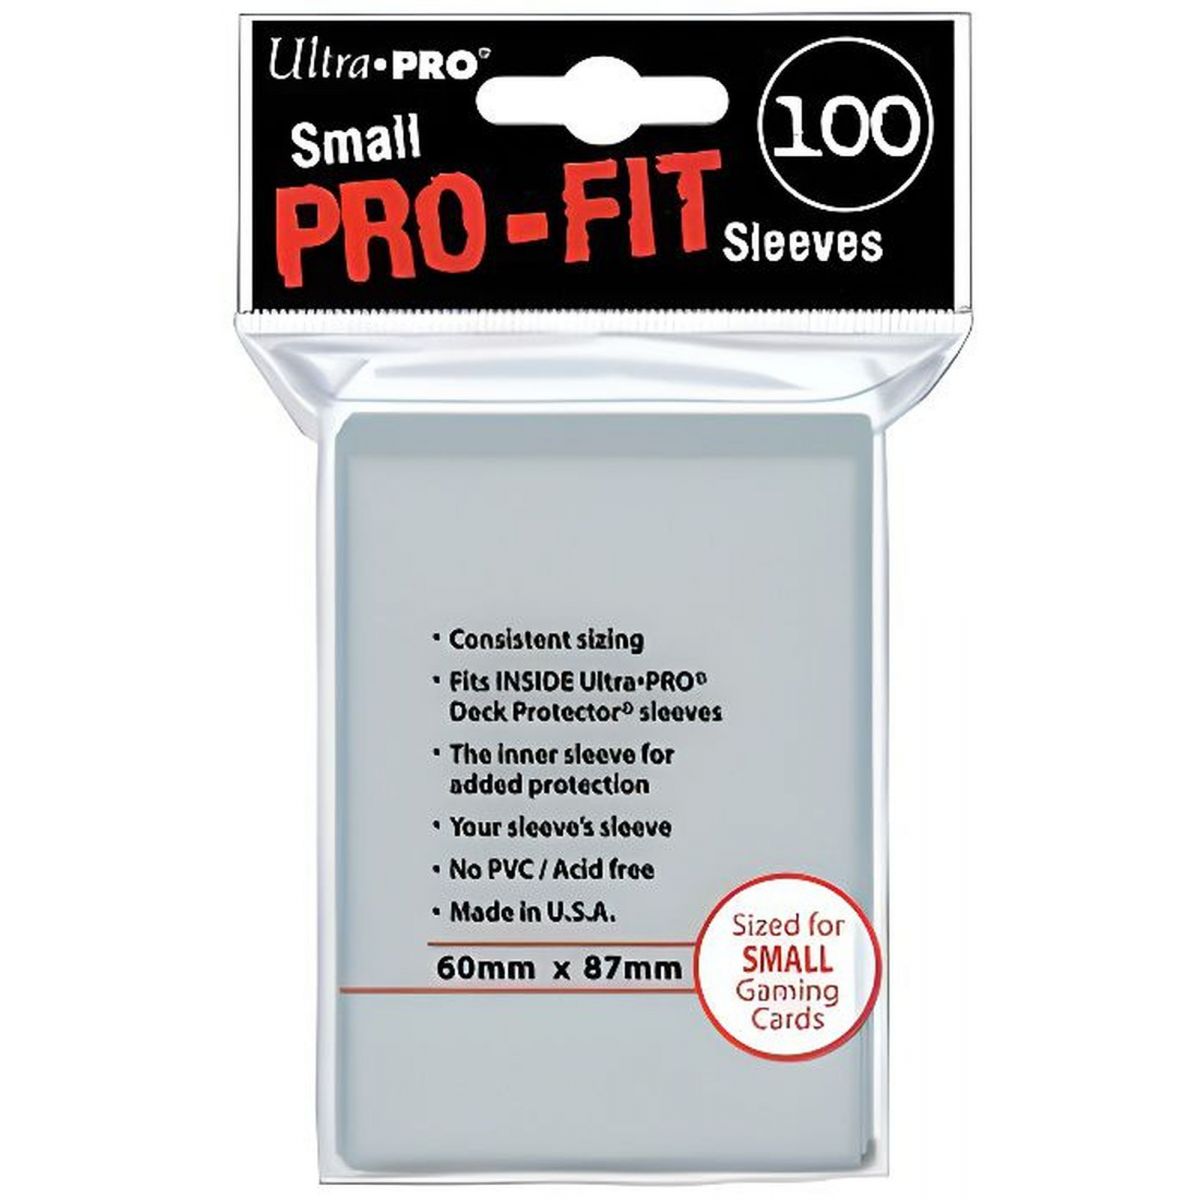 Ultra Pro - Card Sleeves - SMALL Pro-Fit (100)